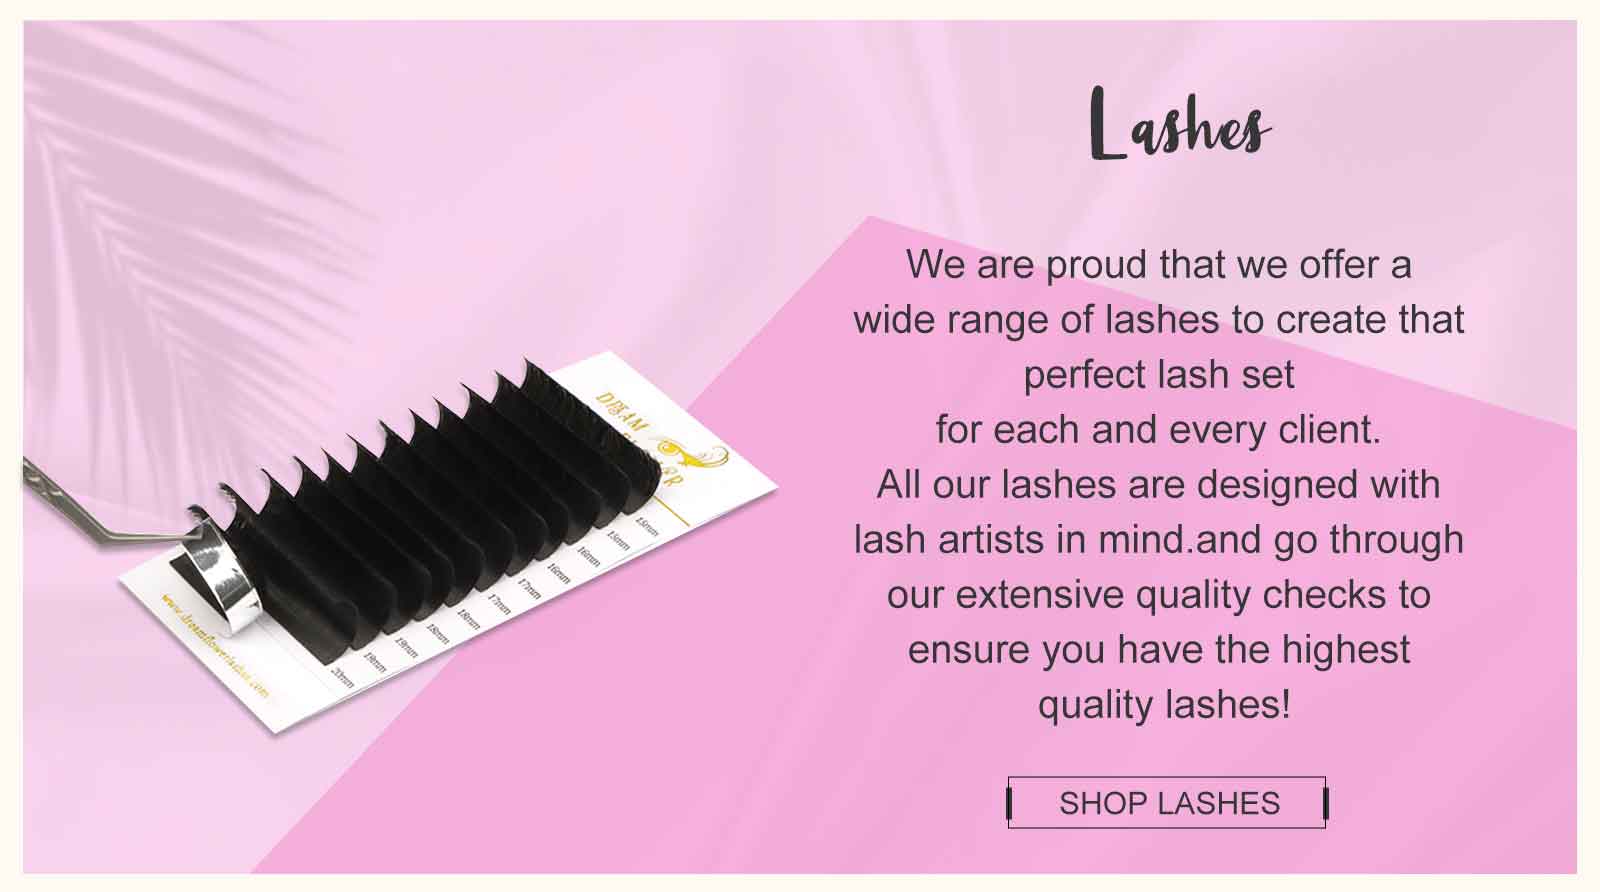  ashes We are proud that we offer a wide range of lashes to create that perfect lash set for each and every client. All our lashes are designed with lash artists in mind.and go through our extensive quality checks to ensure you have the highest quality lashes! SHOP LASHES 